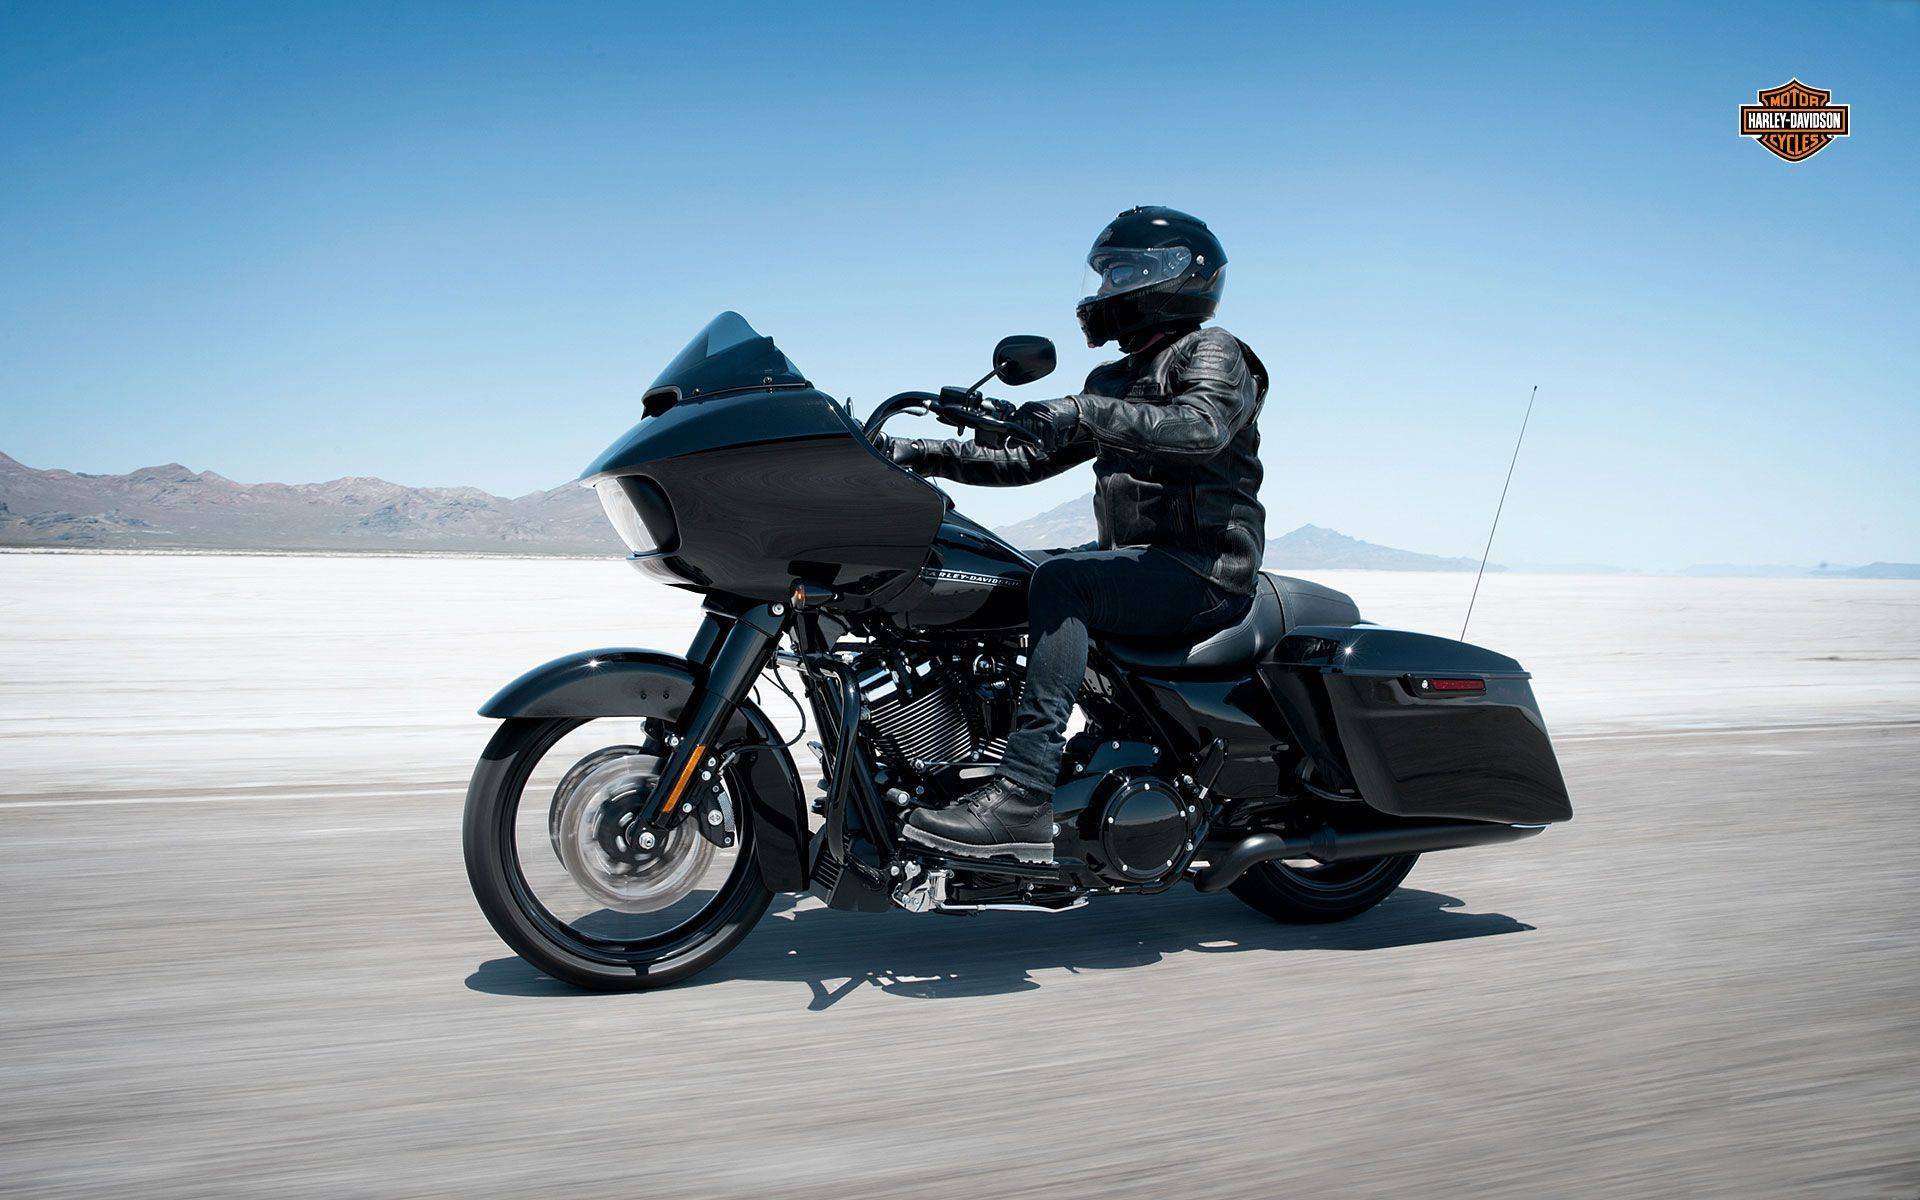 2022 harley davidson road glide special [specs, features, photos] | wbw